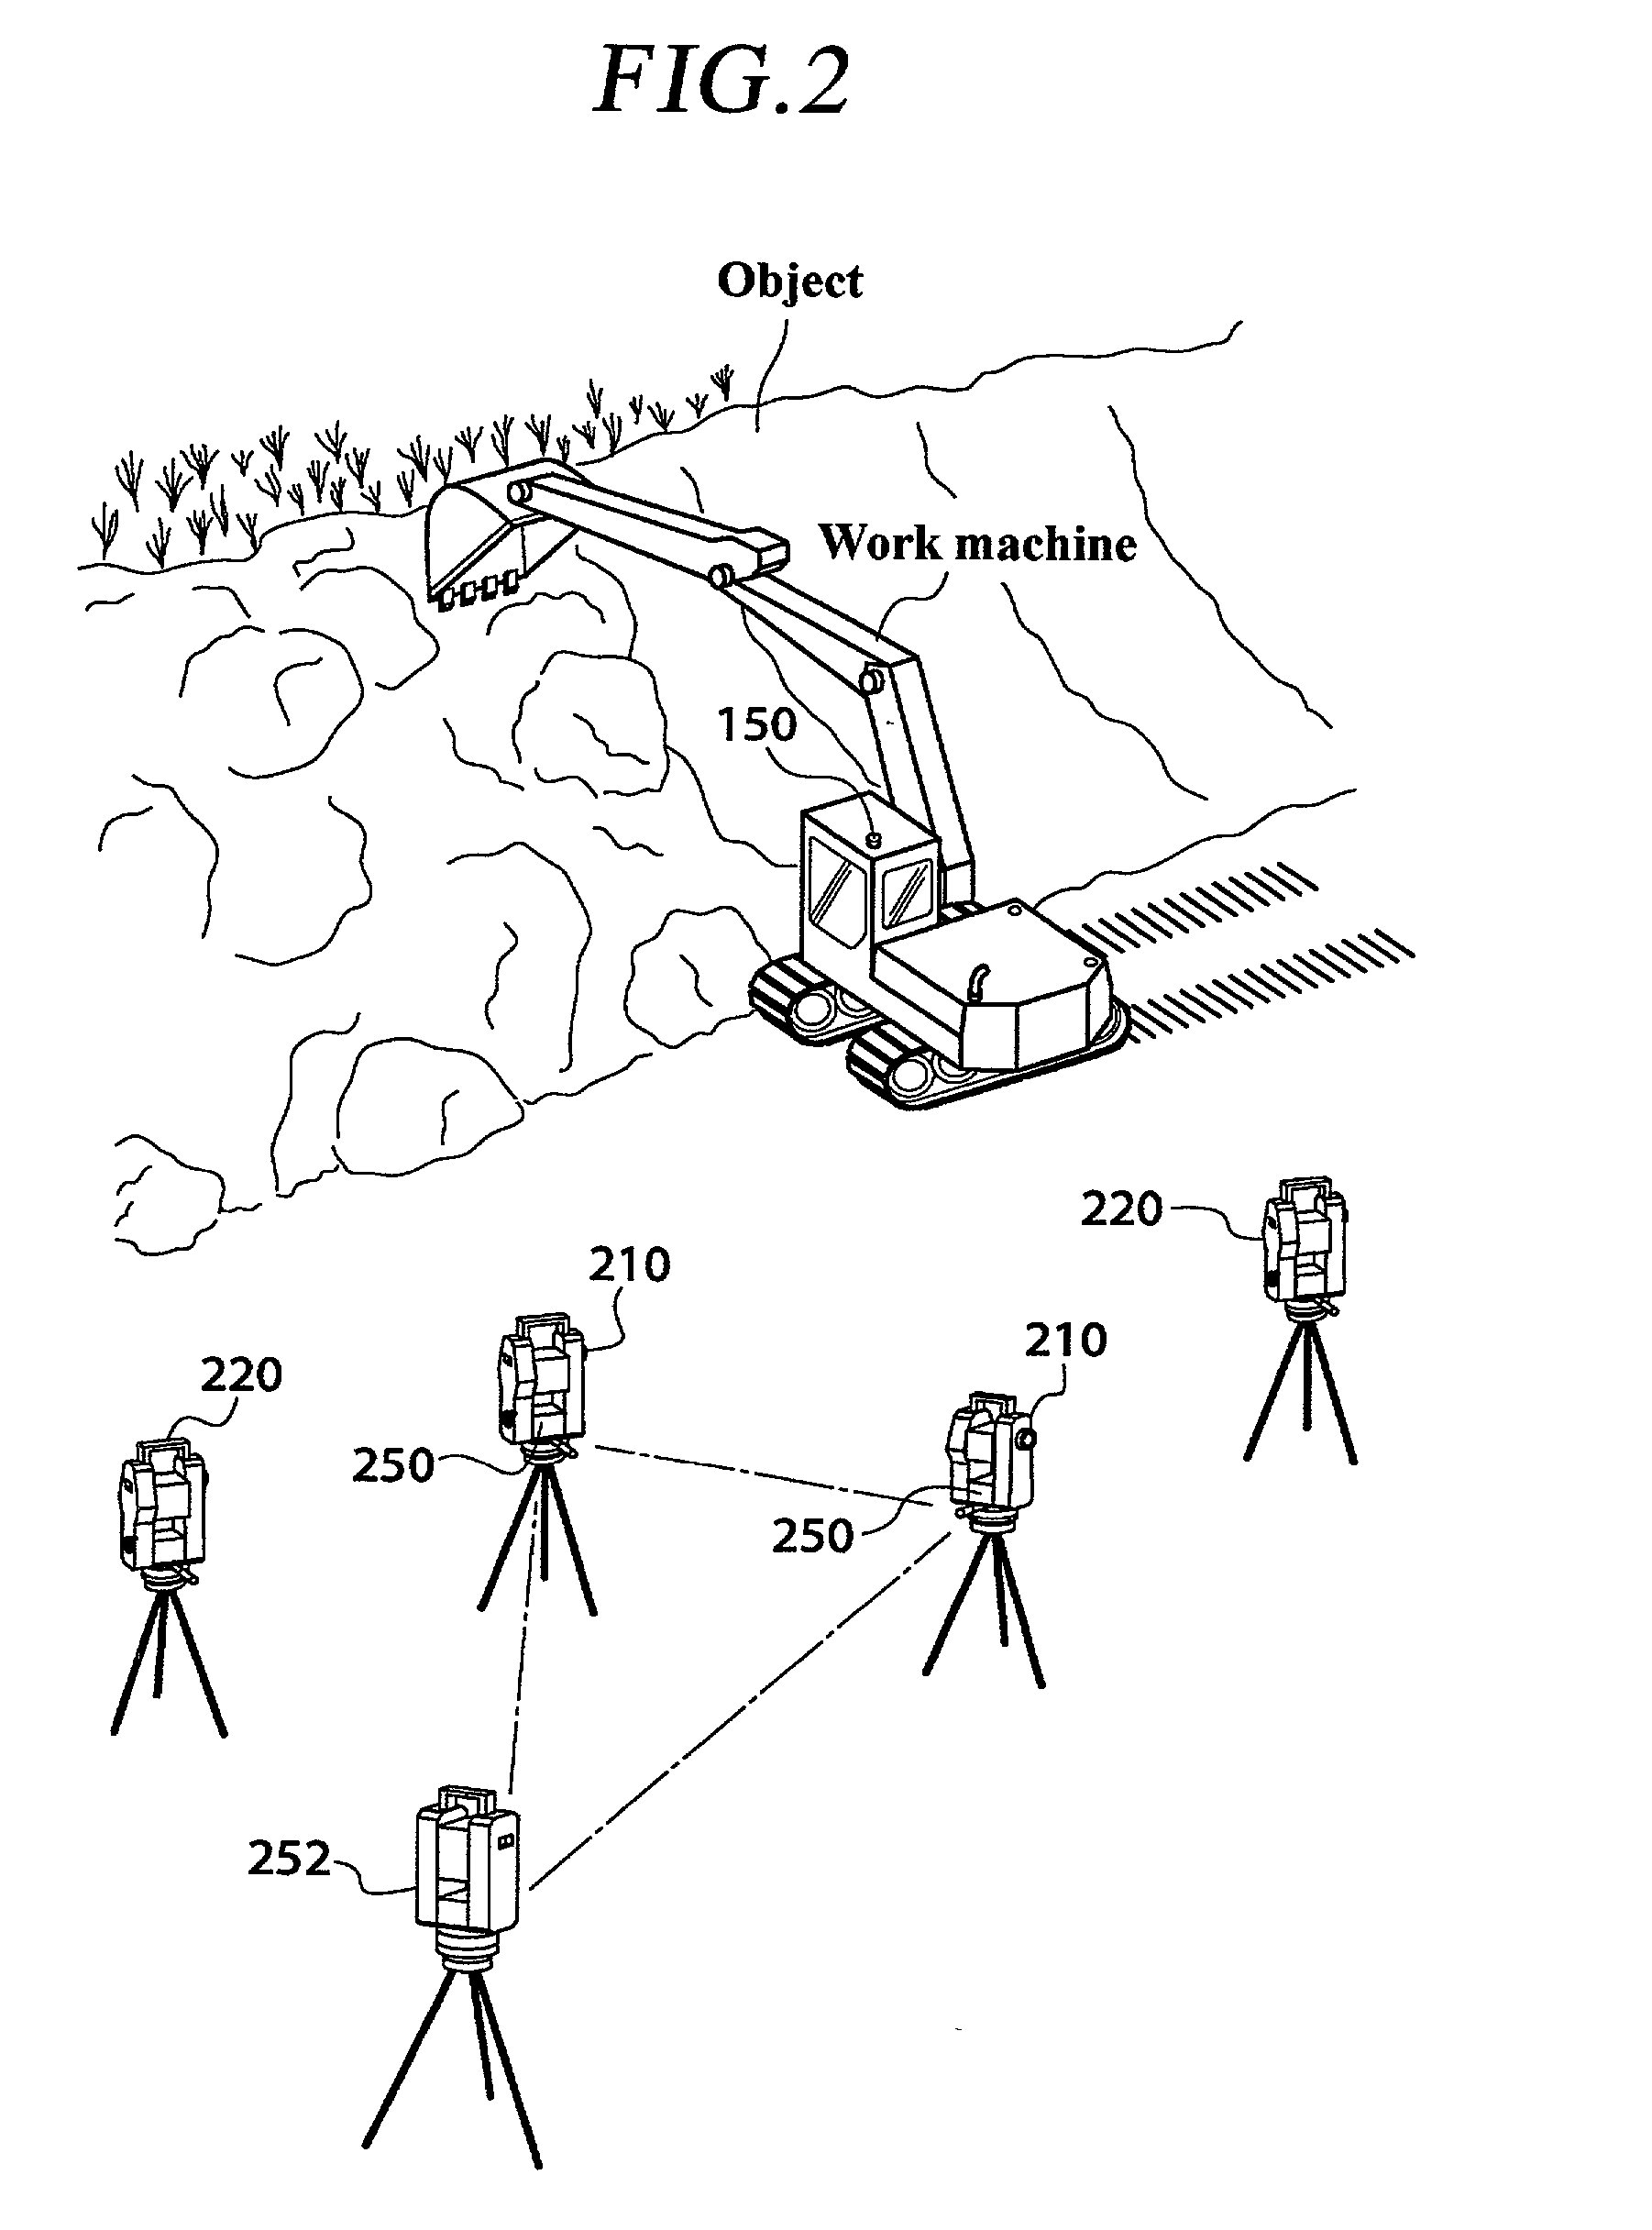 Image measurement and display device, image measurement and display system, construction management method, and construction status monitor system